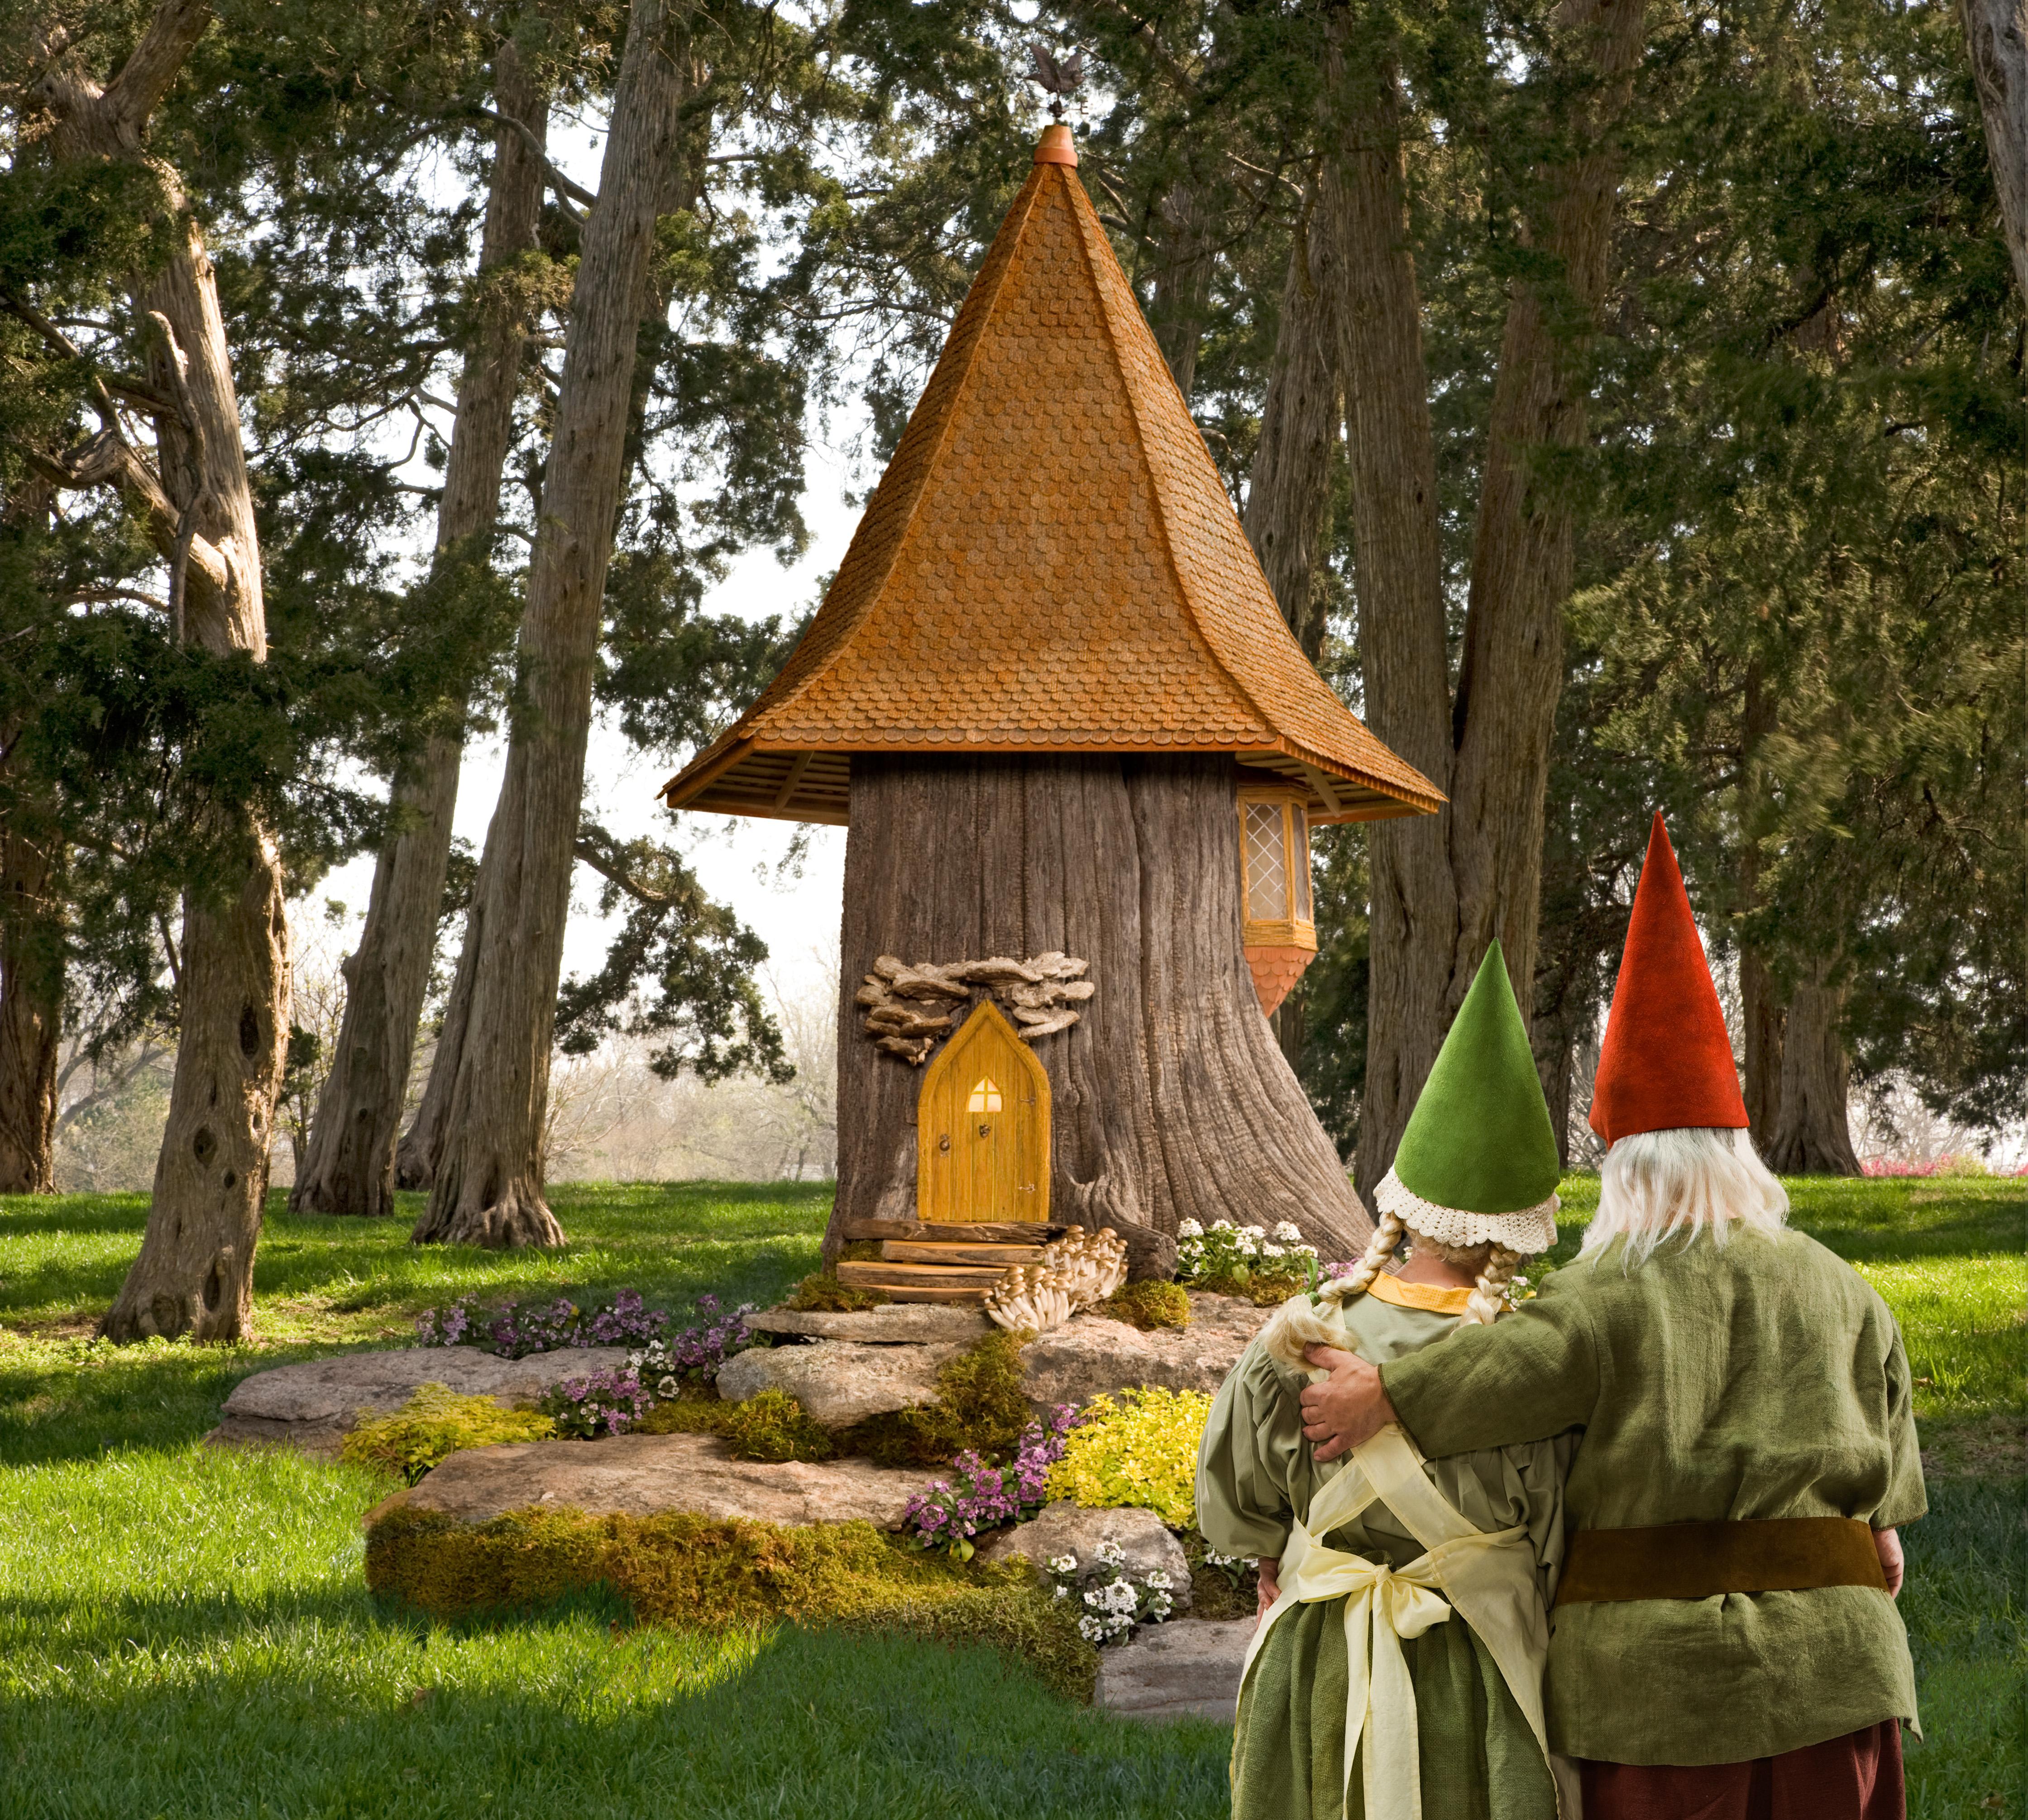 Home Sweet Gnome - Photograph by Nick Vedros